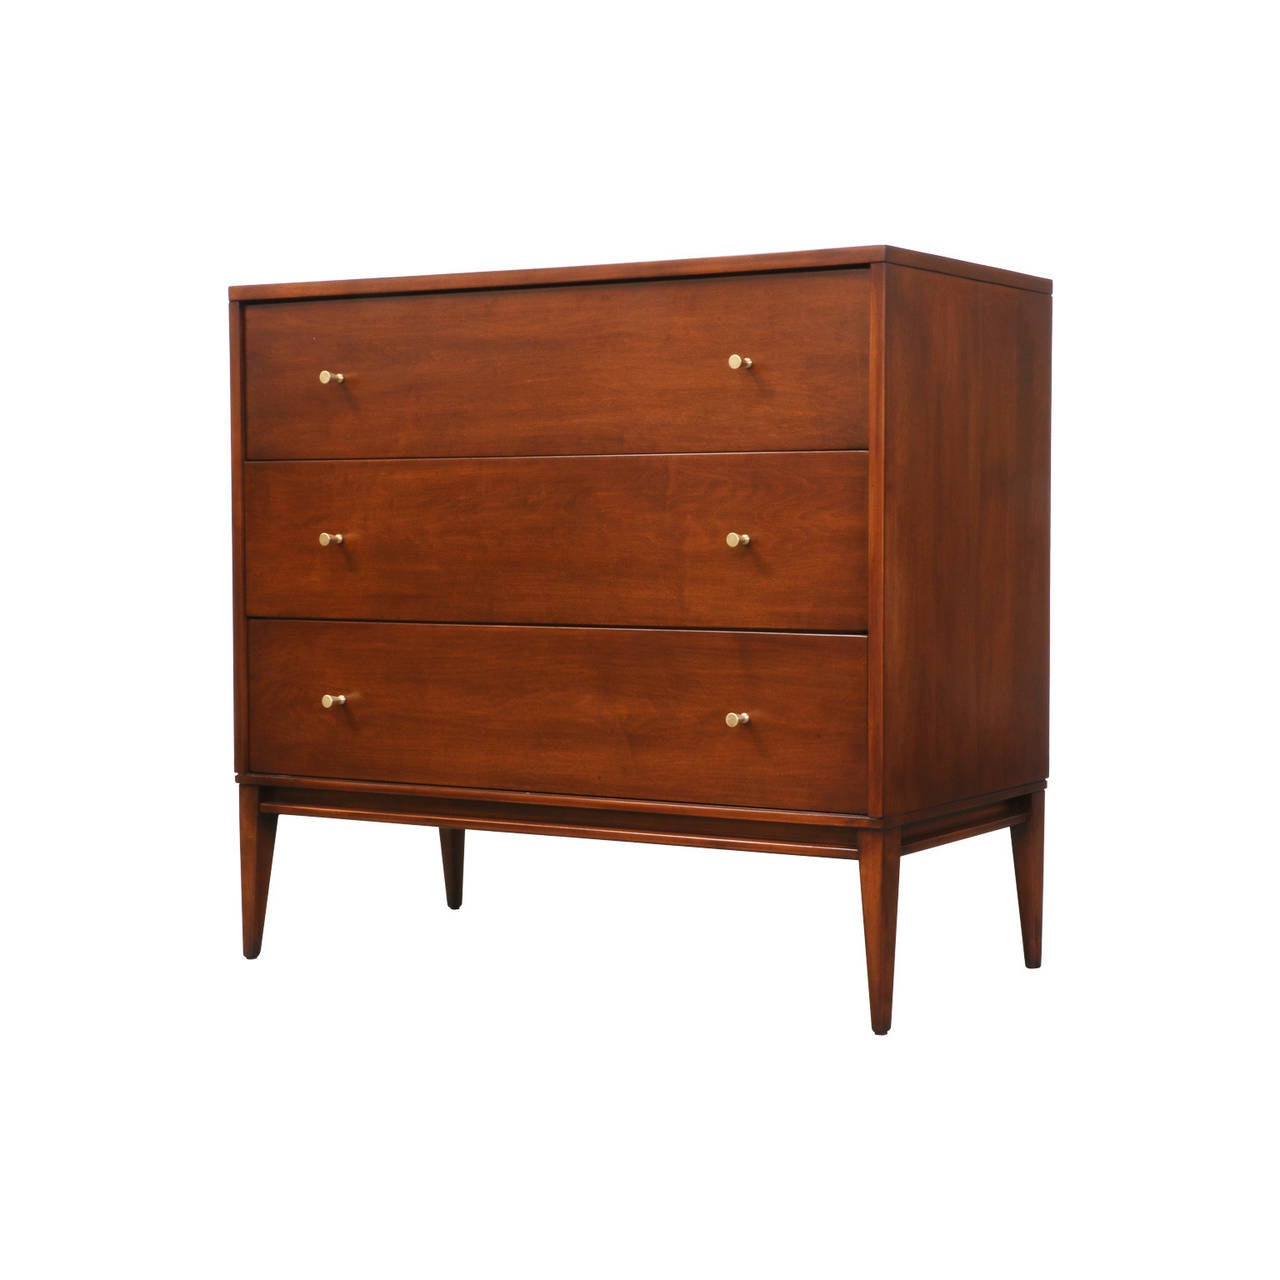 Designer: Paul McCobb
Manufacturer: Winchendon Furniture “Planner Group”
Period/Style: Mid Century Modern
Country: United States
Date: 1950s

Dimensions: 36″L x 18.25″W x 33.5″H
Materials: Maple, Stain, Walnut
Condition: Excellent – Newly